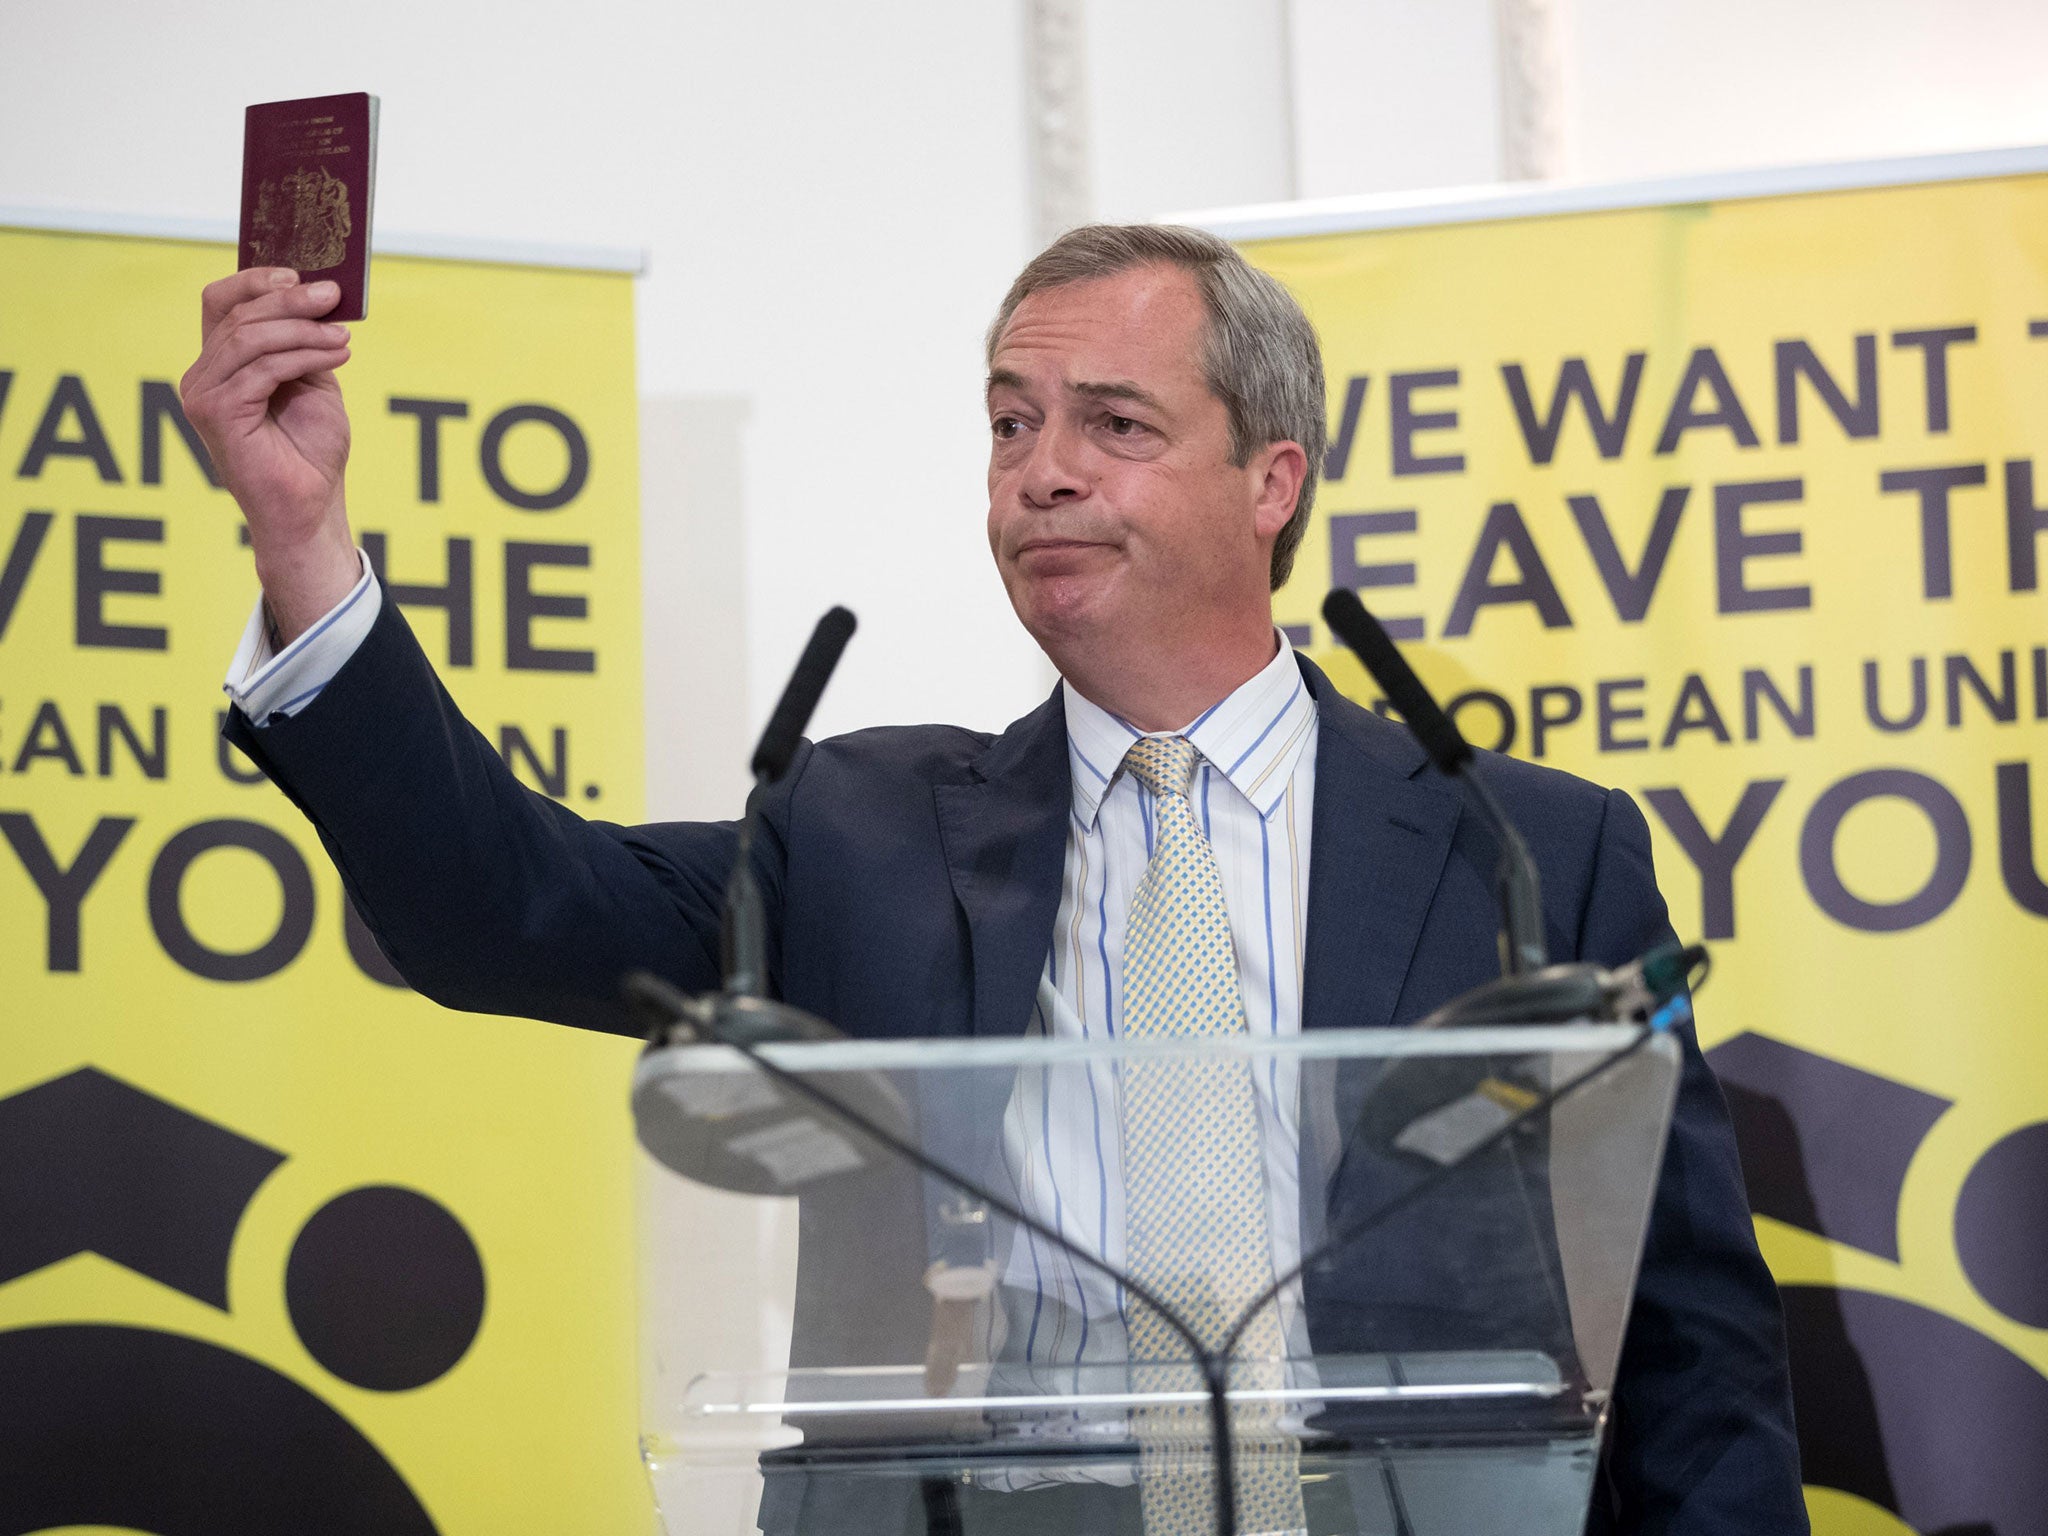 Ukip leader Nigel Farage - who has stoked the debate on immigration - holds up his British passport as he speaks at a Grassroots Out! campaign rally